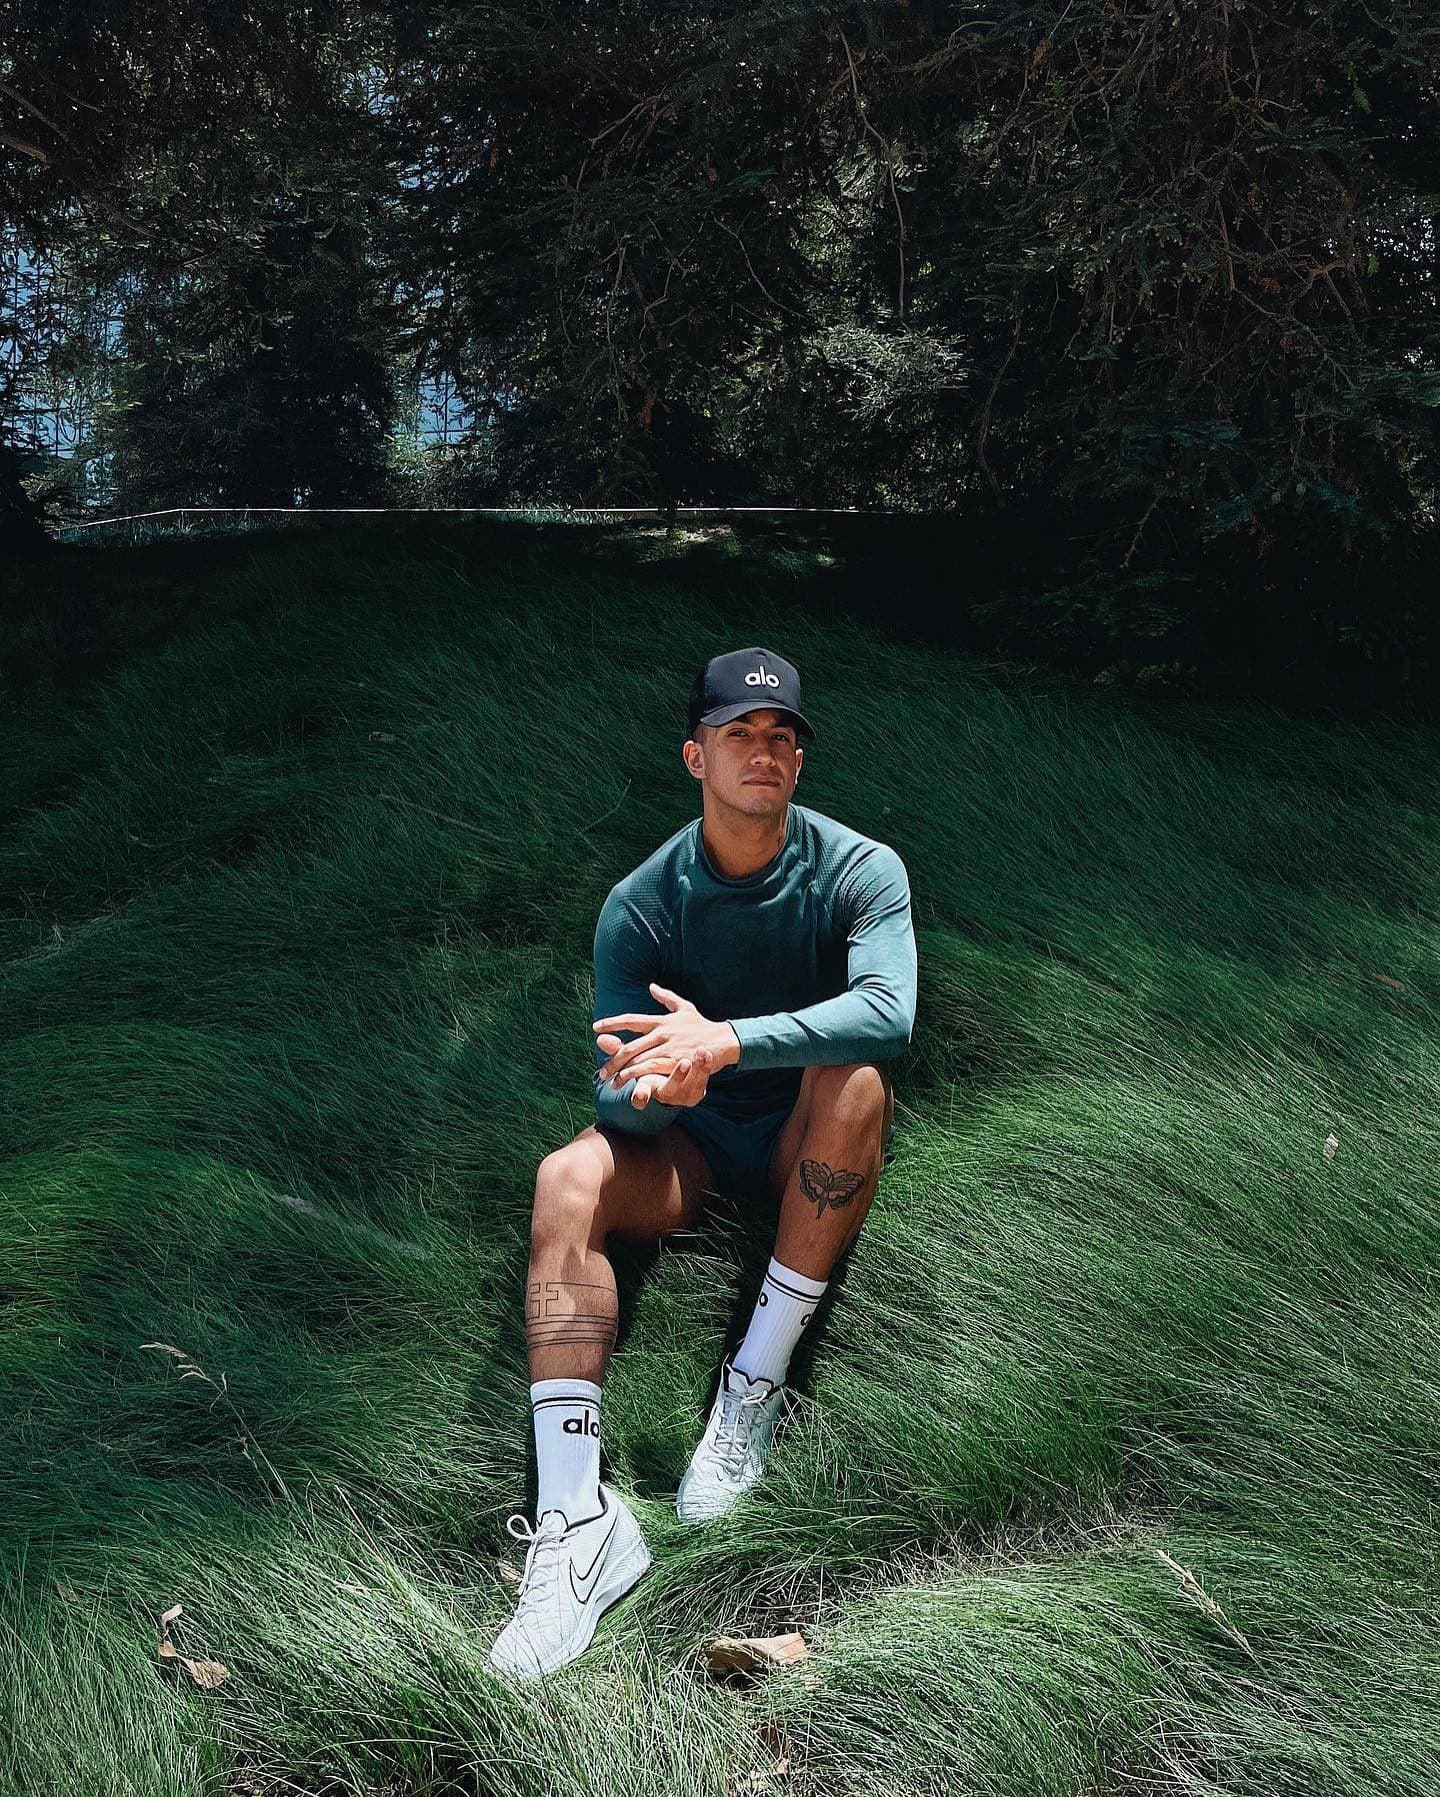 @christiancaro_ wearing a dark teal hooded runner jacket with a pair of Alo crew socks and a black Alo trucker hat while sitting in a patch of long grass.  